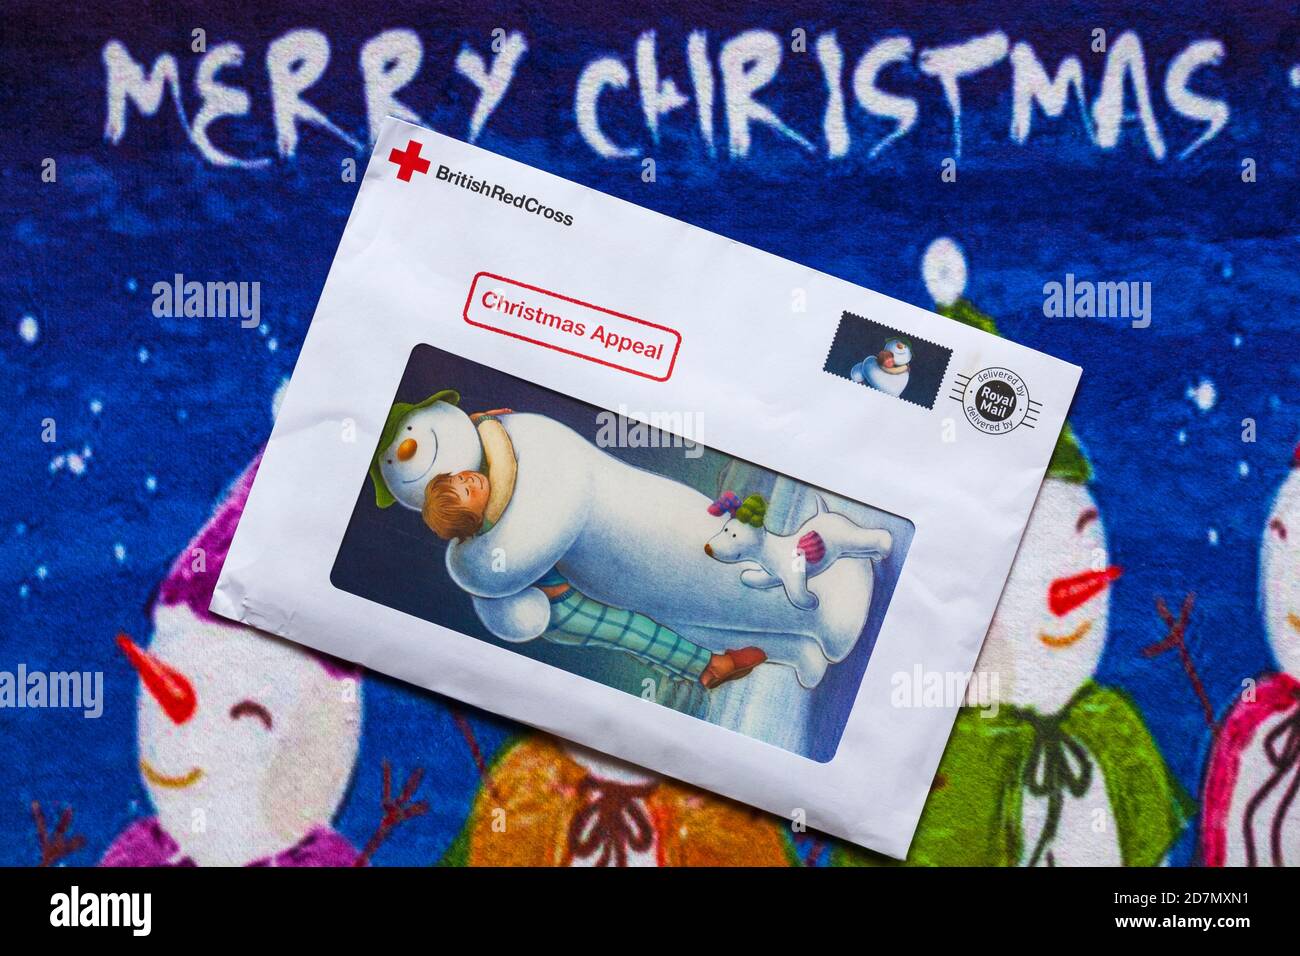 Post on Christmas mat - charity appeal, Christmas appeal from British Red Cross - Merry Christmas Stock Photo